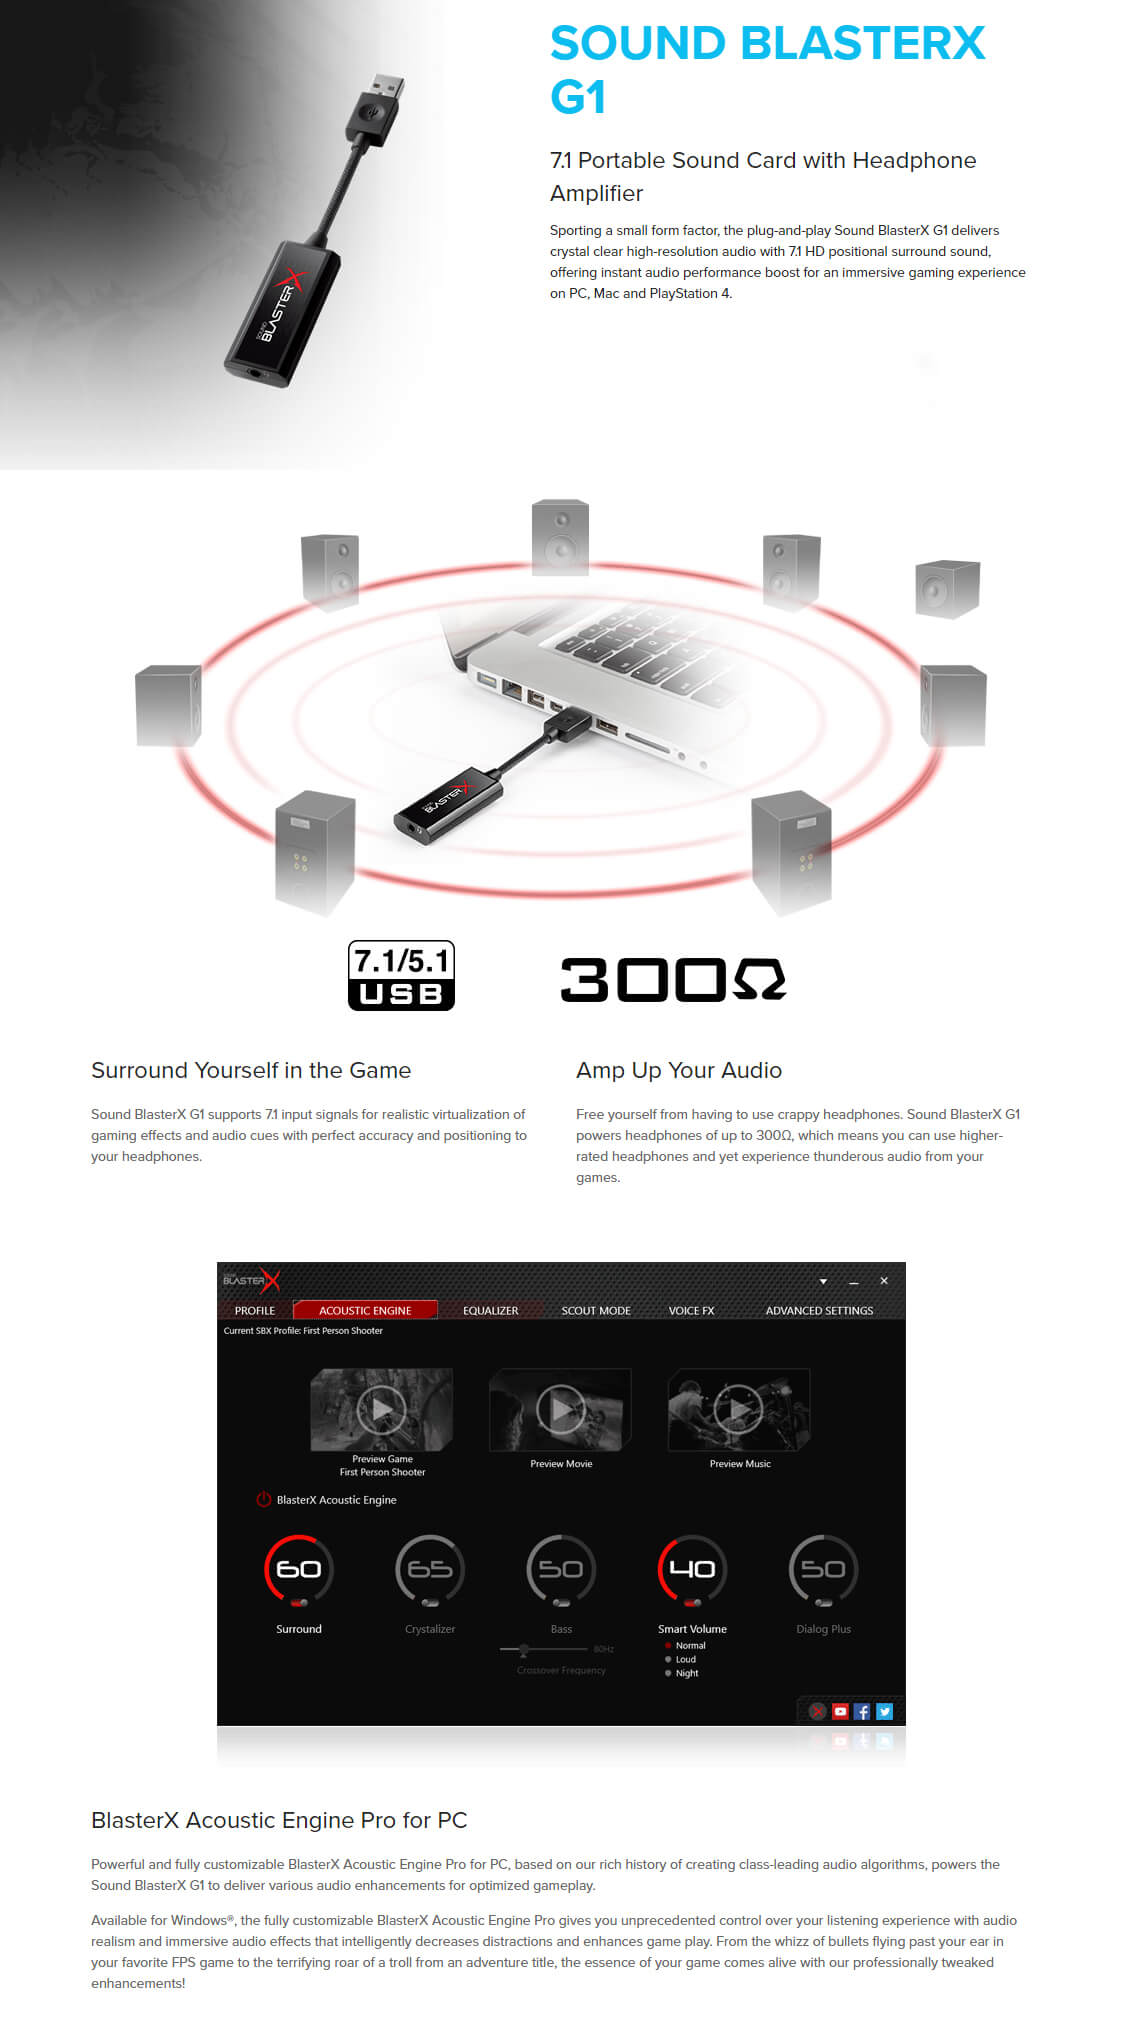 A large marketing image providing additional information about the product Creative Sound Blaster X G1 Portable Soundcard w/ Headphone Amplifier - Additional alt info not provided